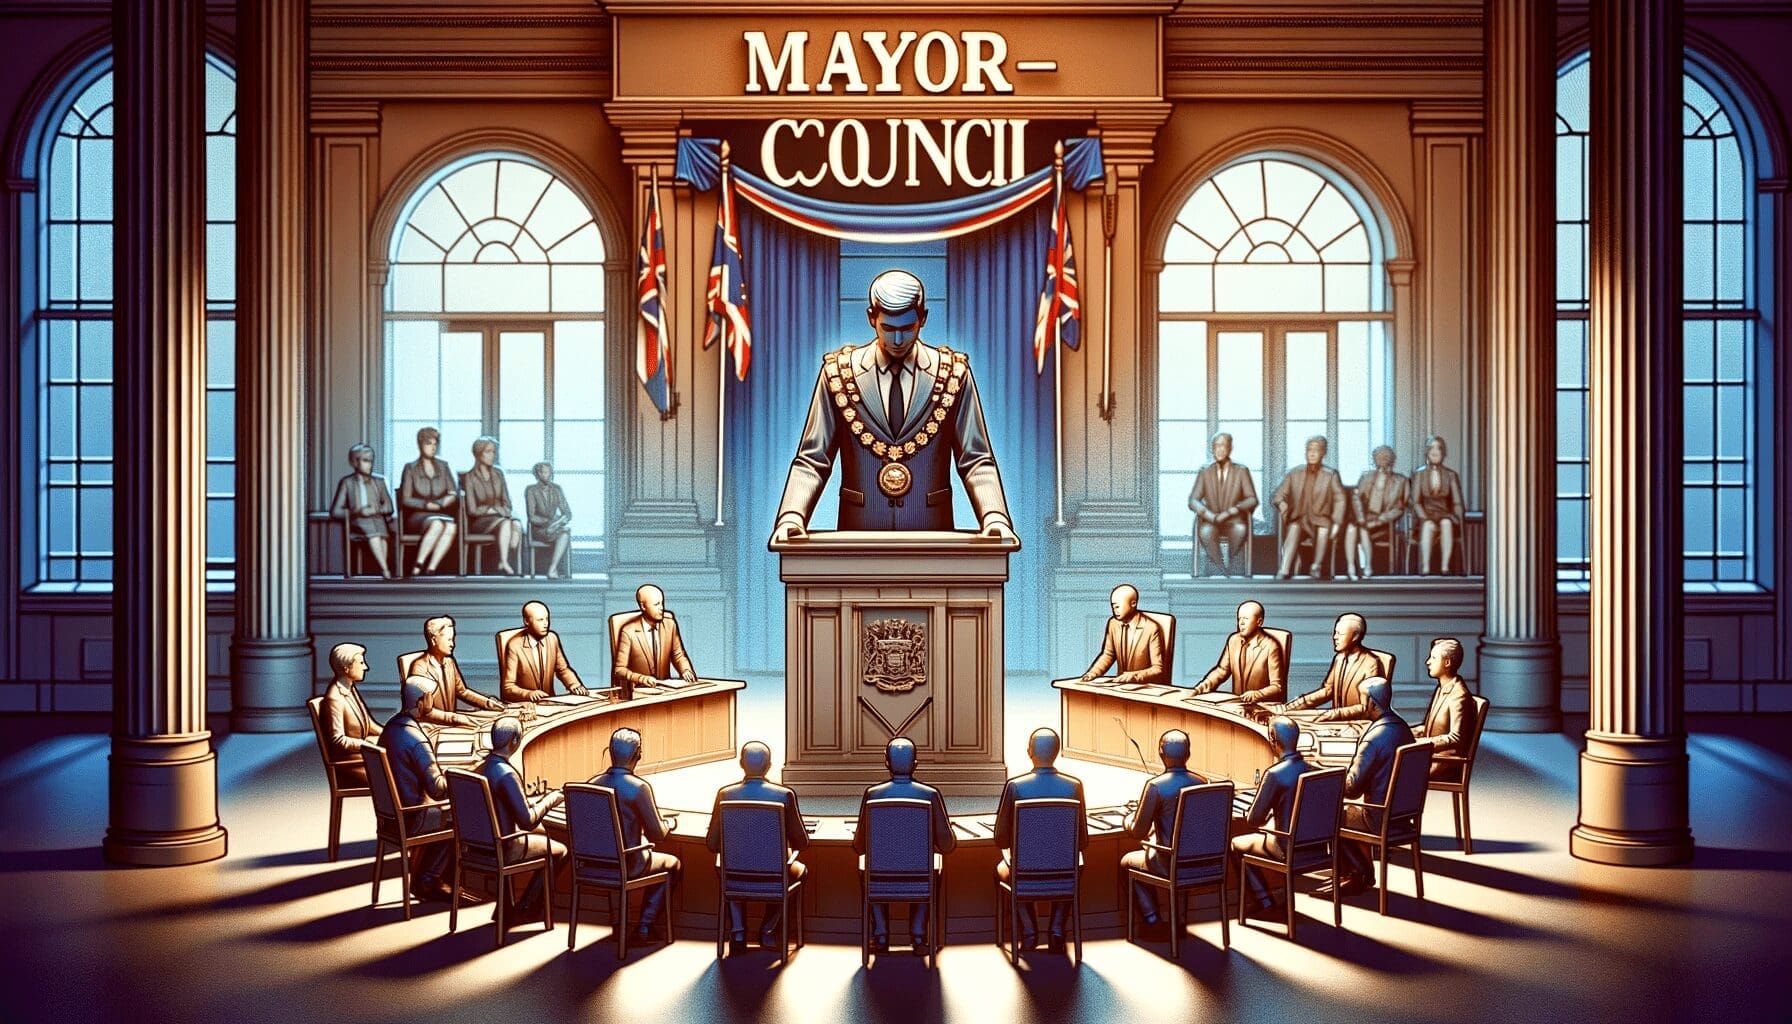 Mayor-Council Form of Municipal Government